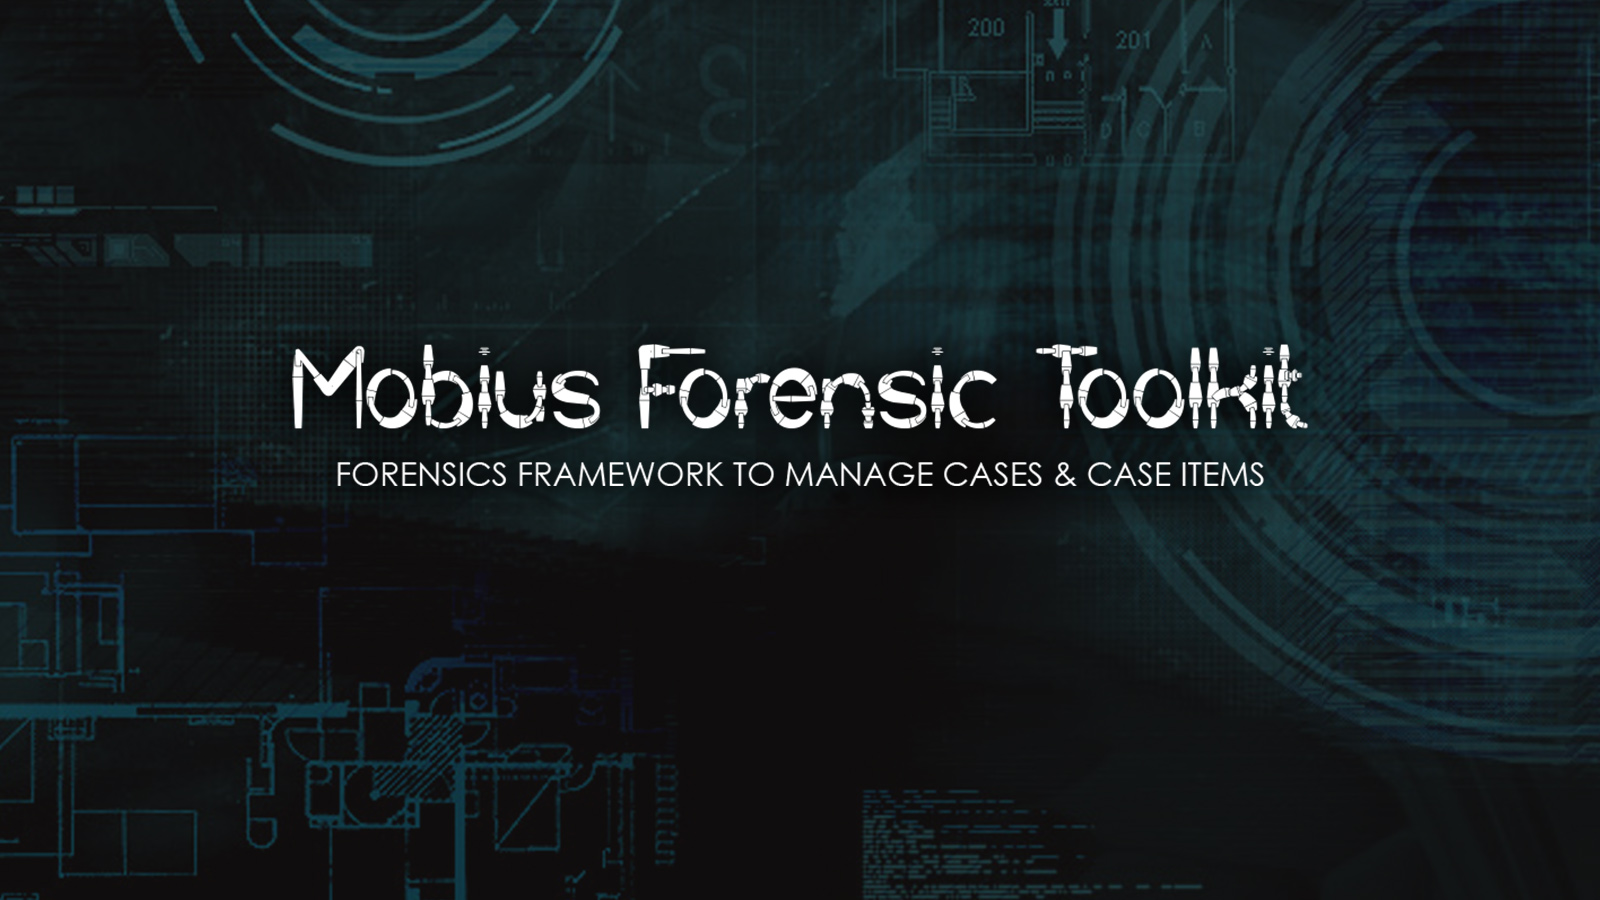 Mobius Forensic Toolkit - Forensics Framework To Manage Cases & Case Items